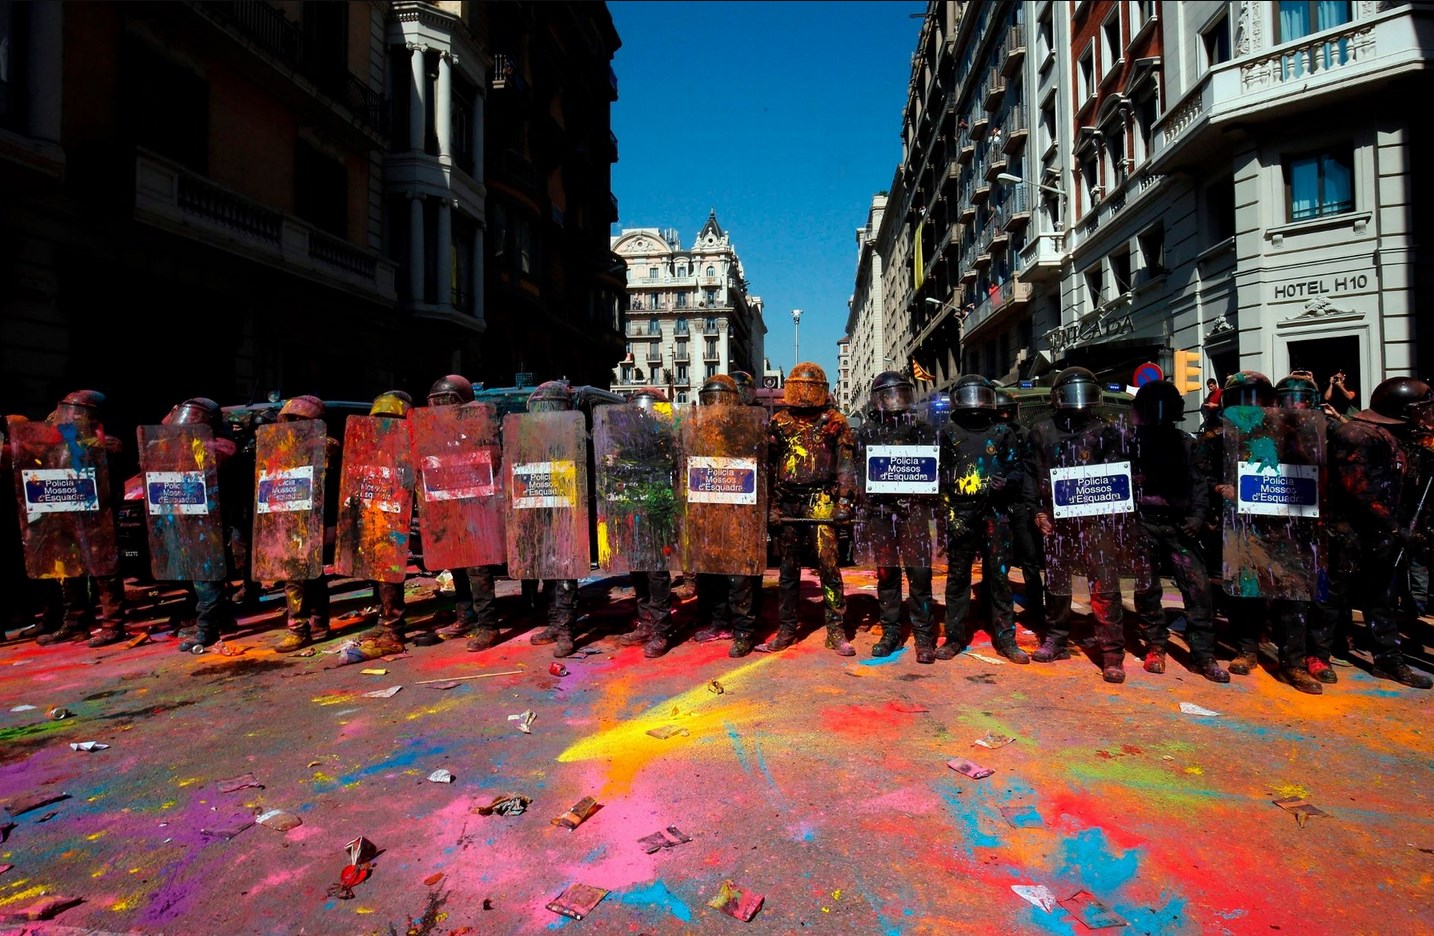 Protesters in Barcelona are using their artistic abilities...